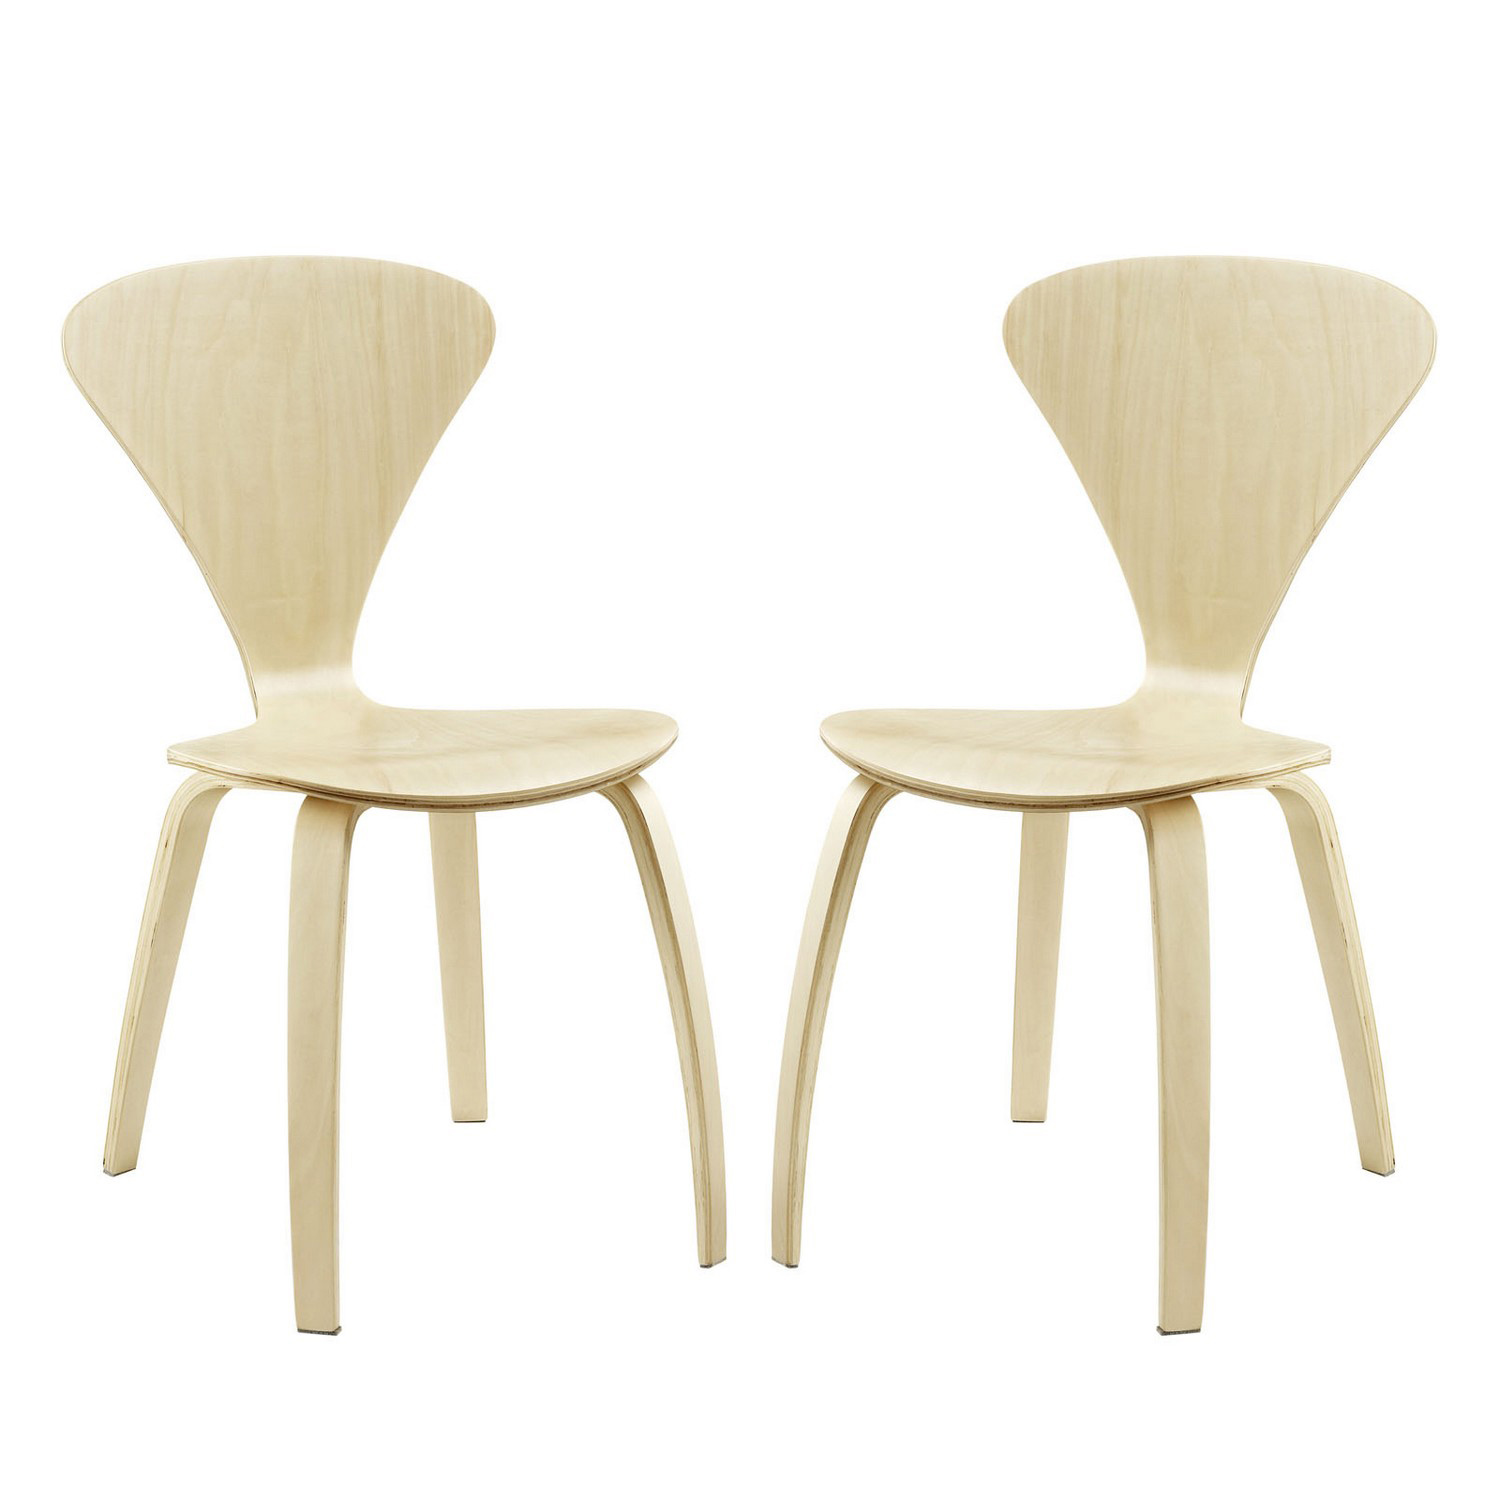 Modway Vortex Dining Chairs Set of 2 - Natural